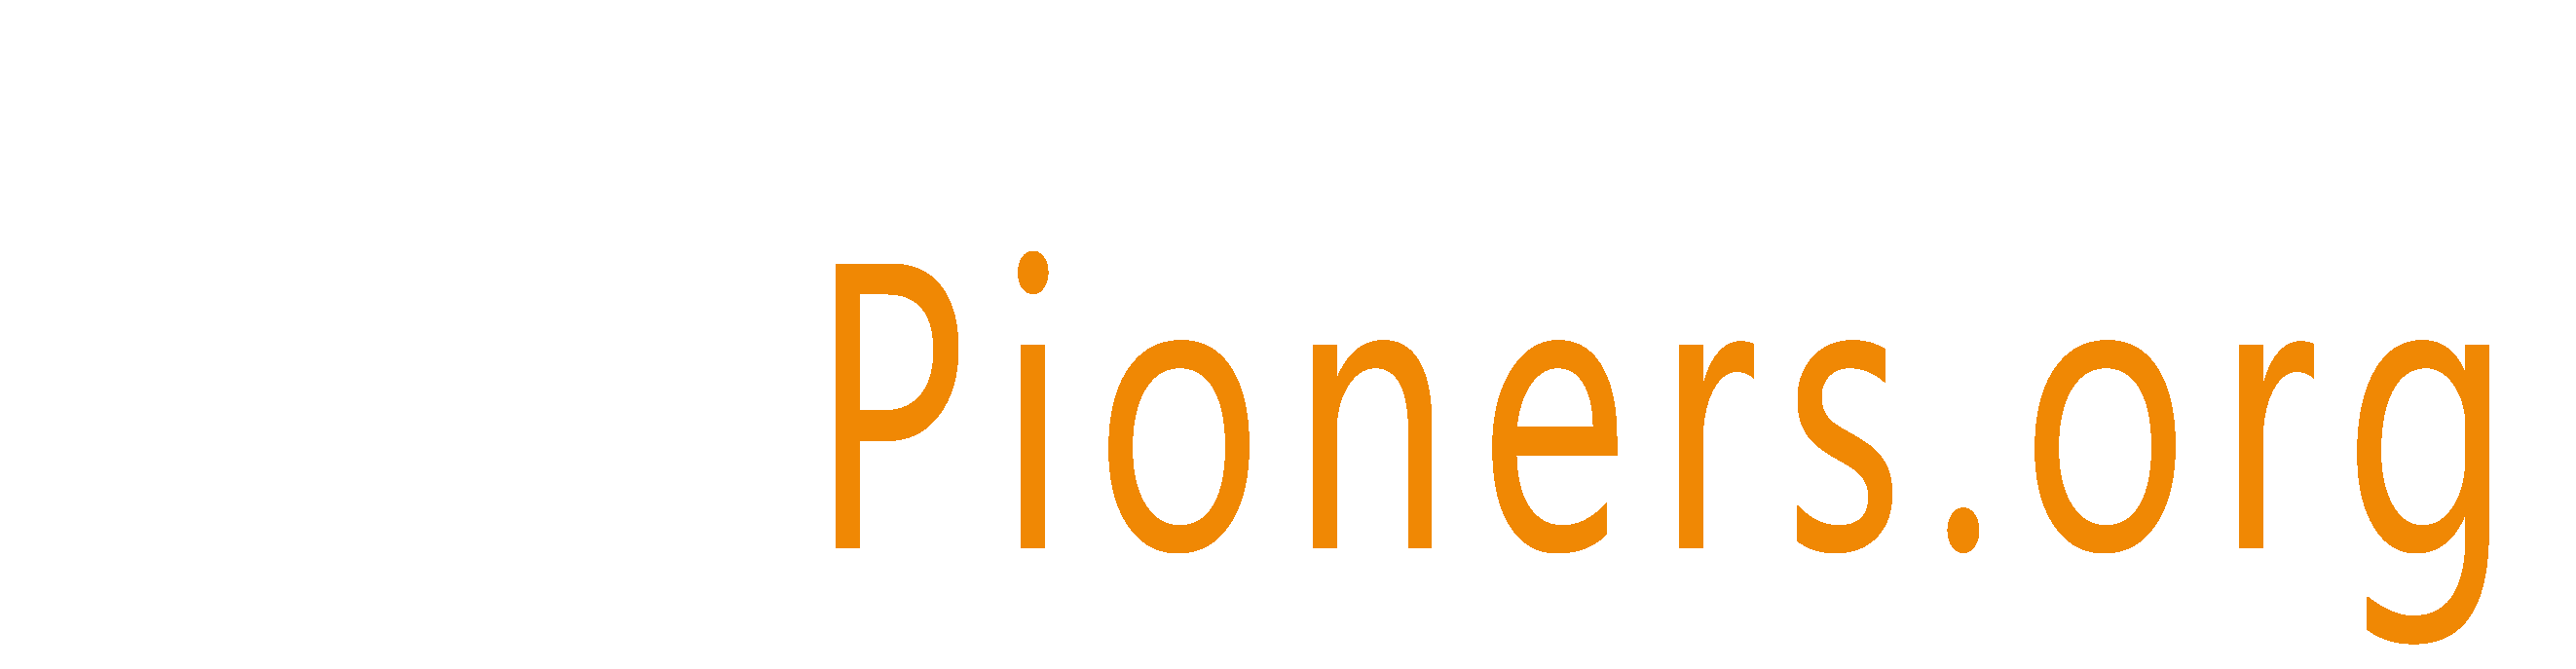 pioners.org